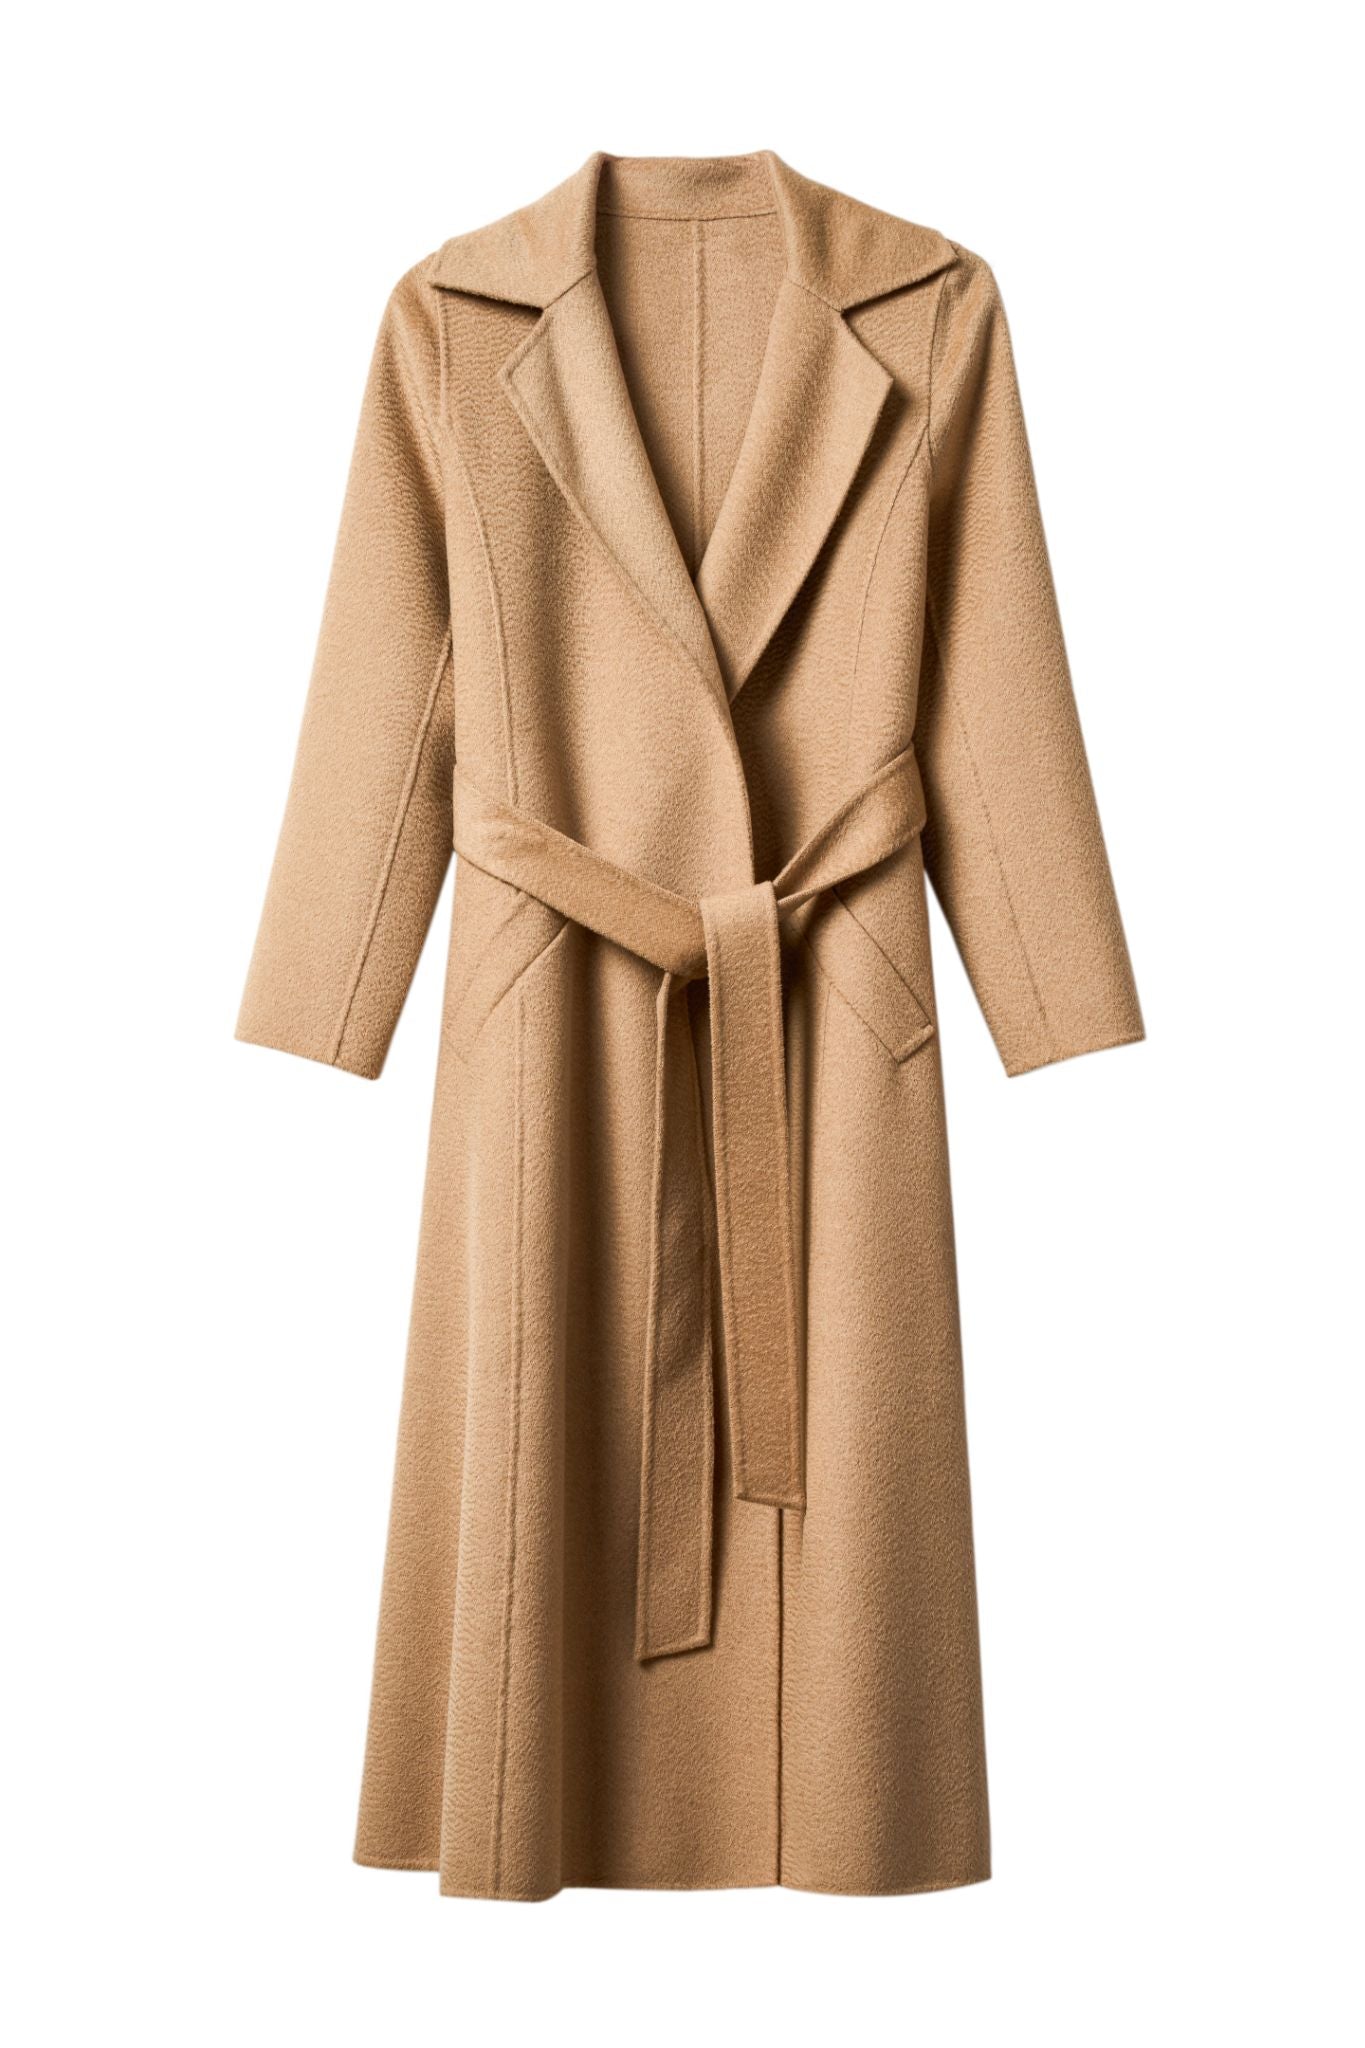 Elevated Comfort: Discover Our Cashmere Coat Range